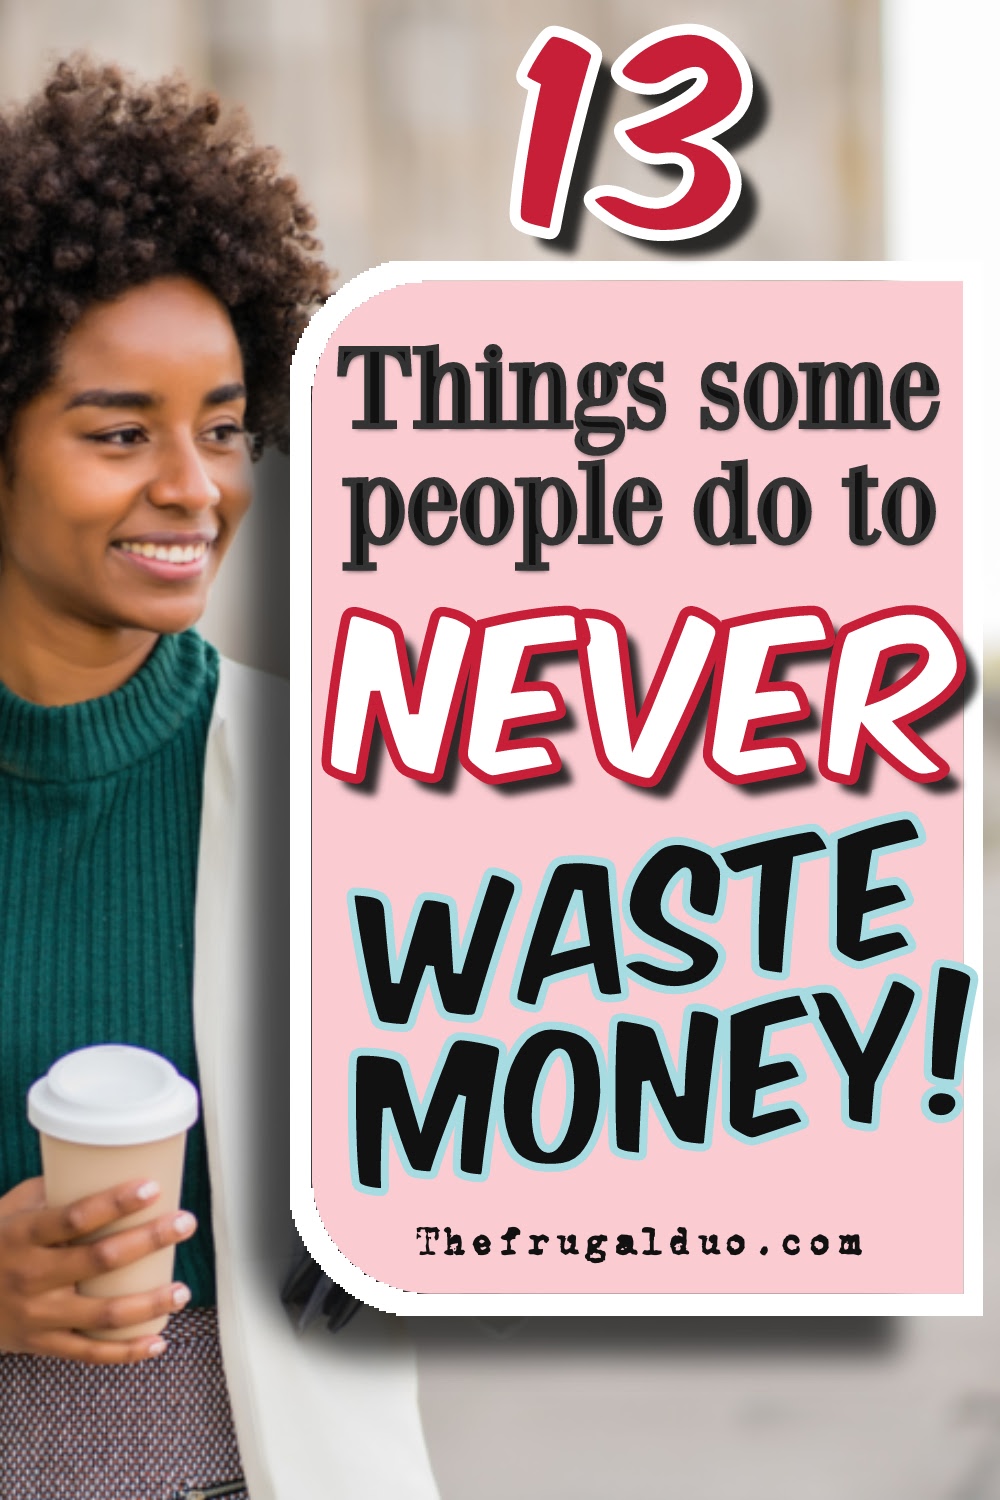 13 Things Some People Never Do to Waste Money